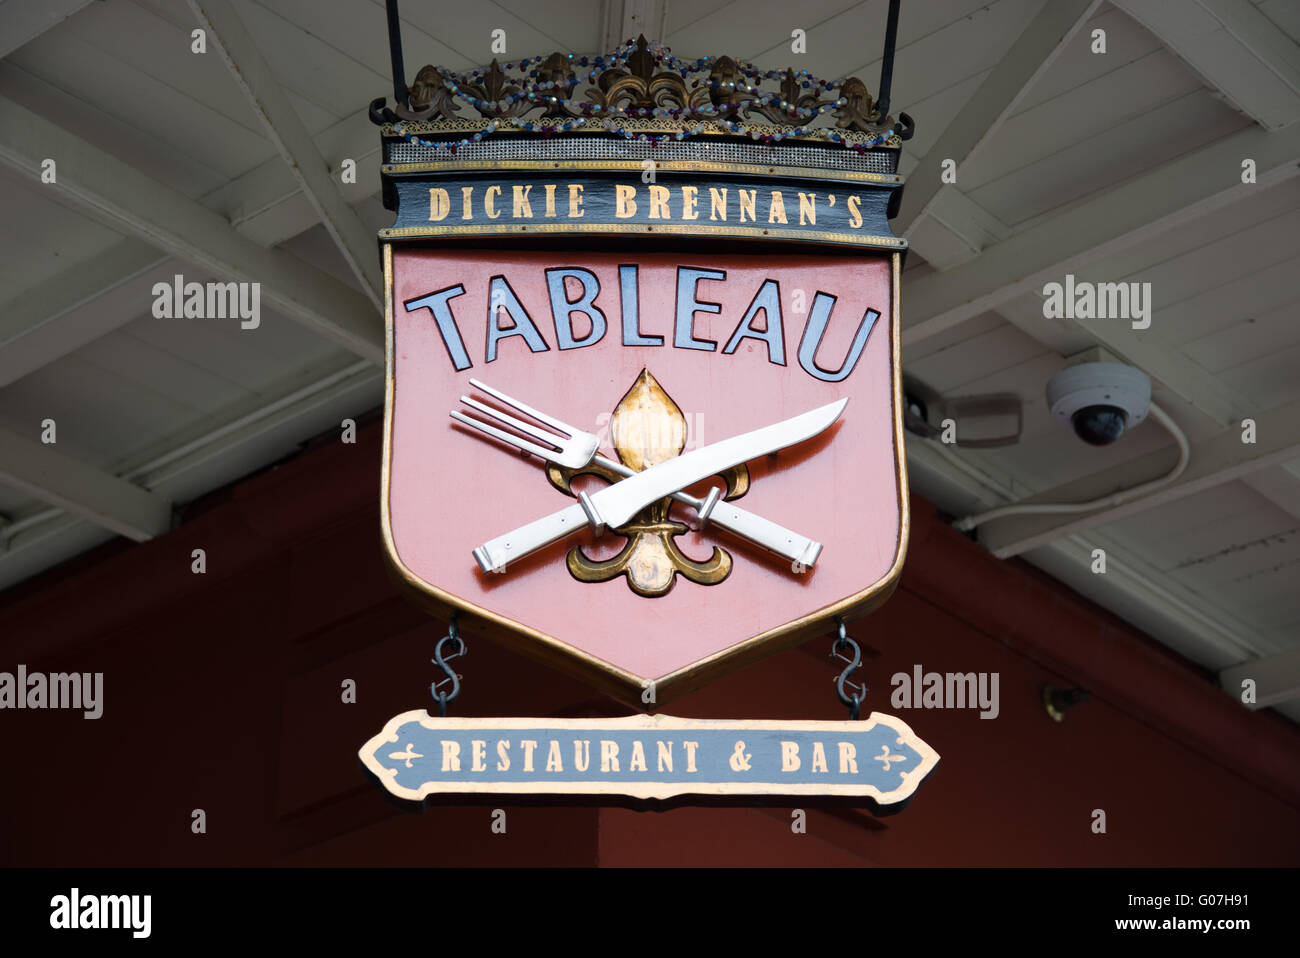 Tableau Restaurant and Bar, French Quarter, New Orleans, Louisiana, USA. Stock Photo